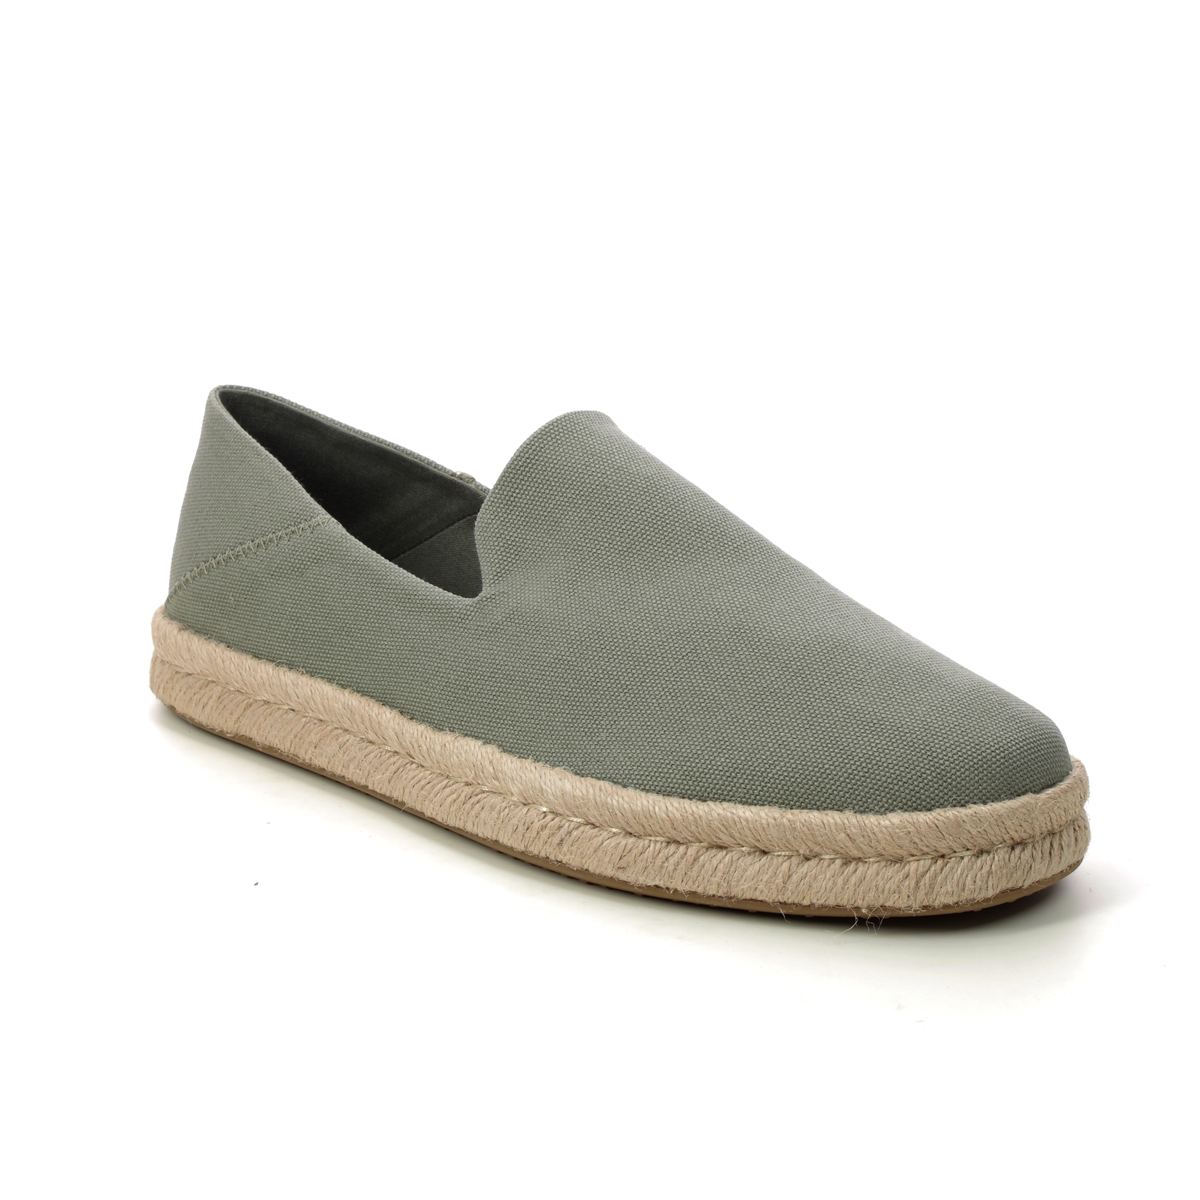 Toms Santiago Alp 2 Sage green Mens Closed Toe Sandals 10020071-90 in a Plain Canvas in Size 8